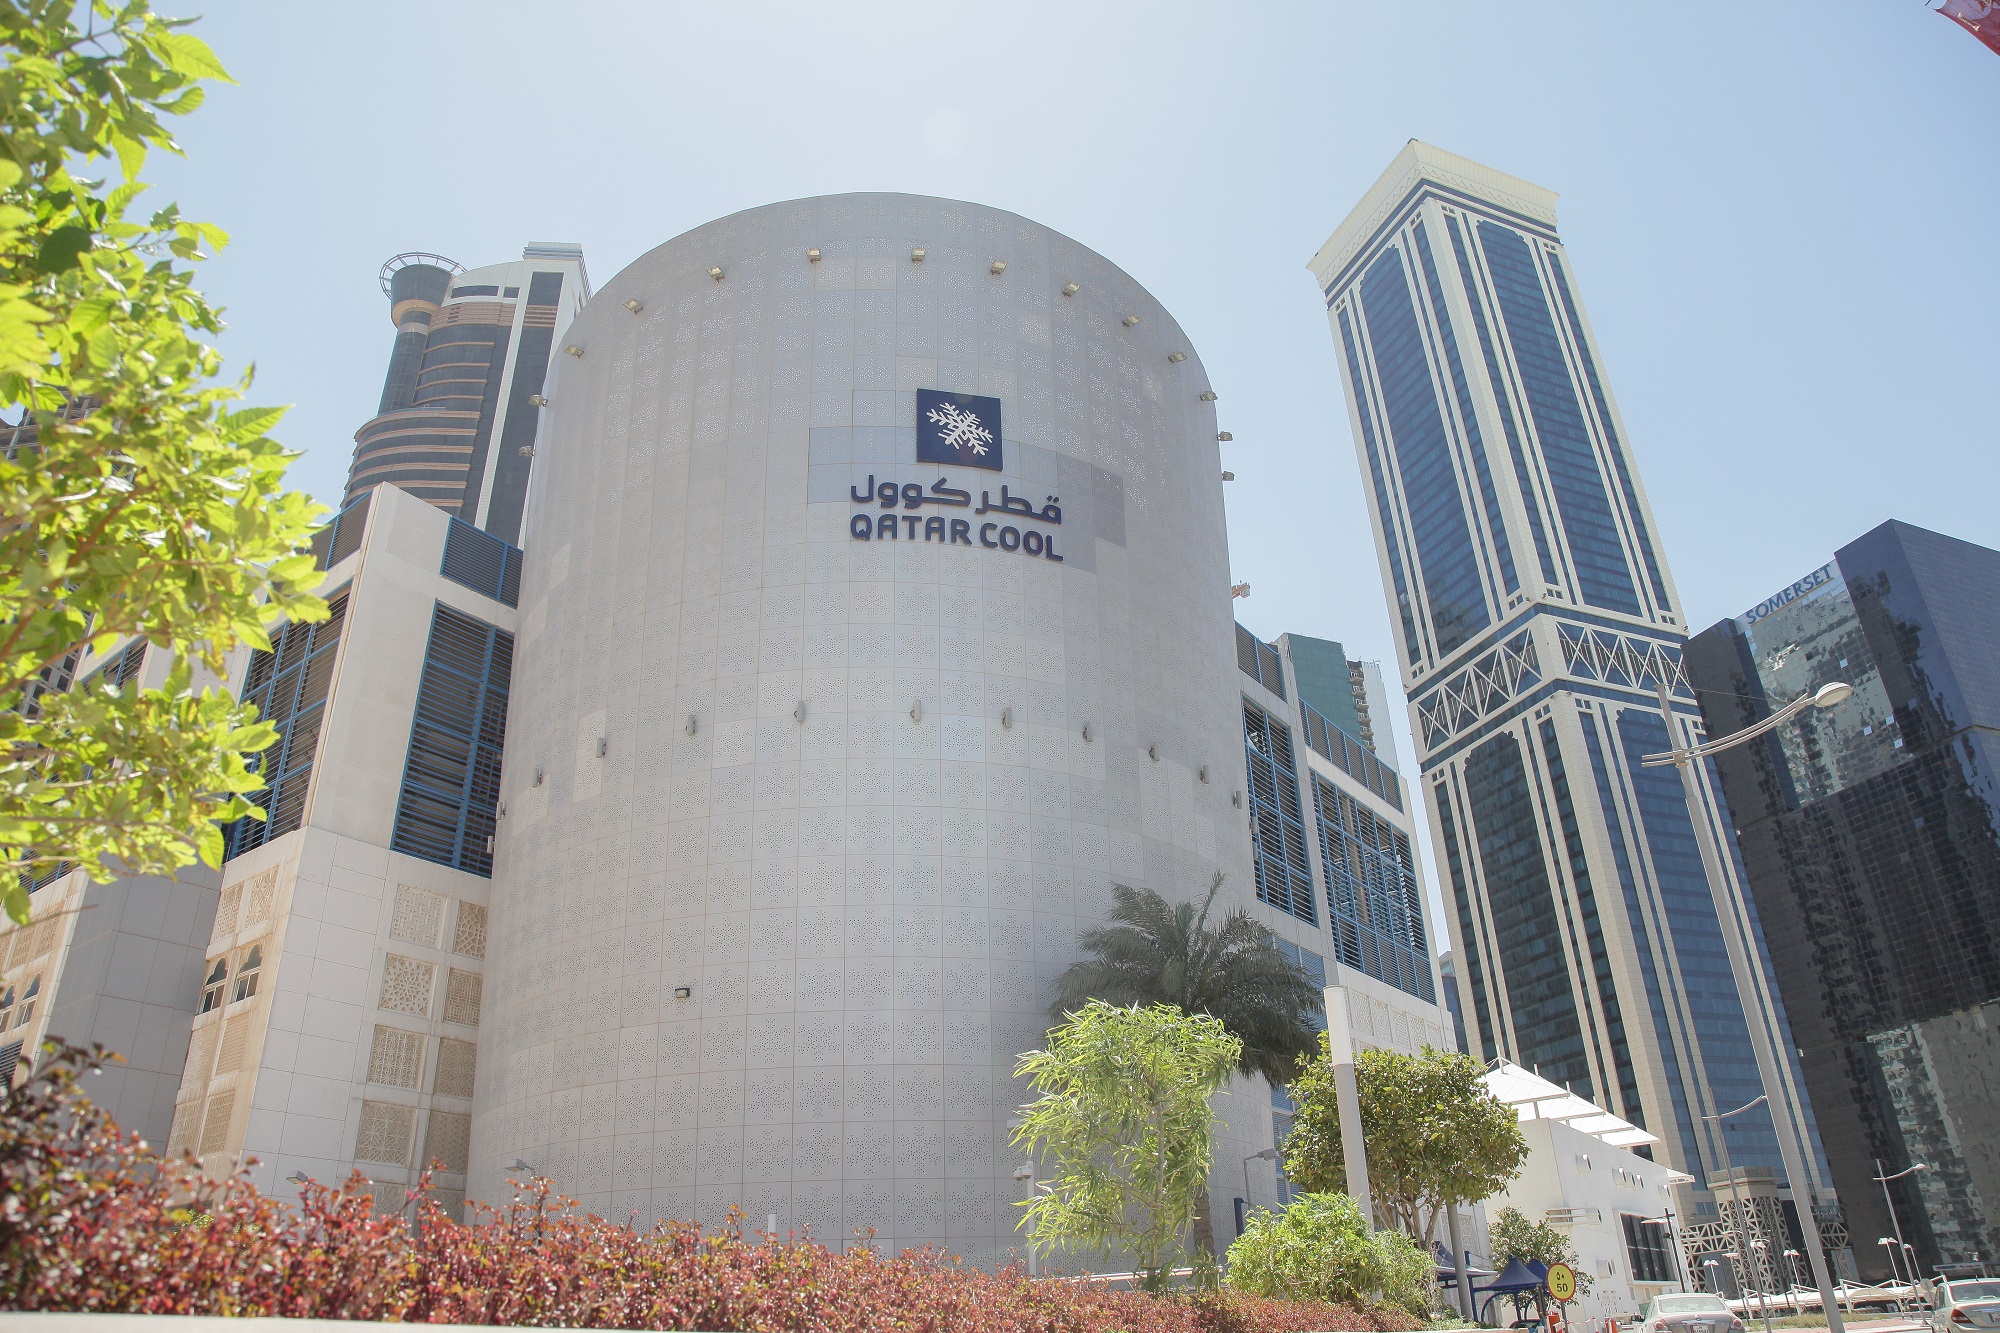 UDC Increase its Capital Share in Qatar Cool